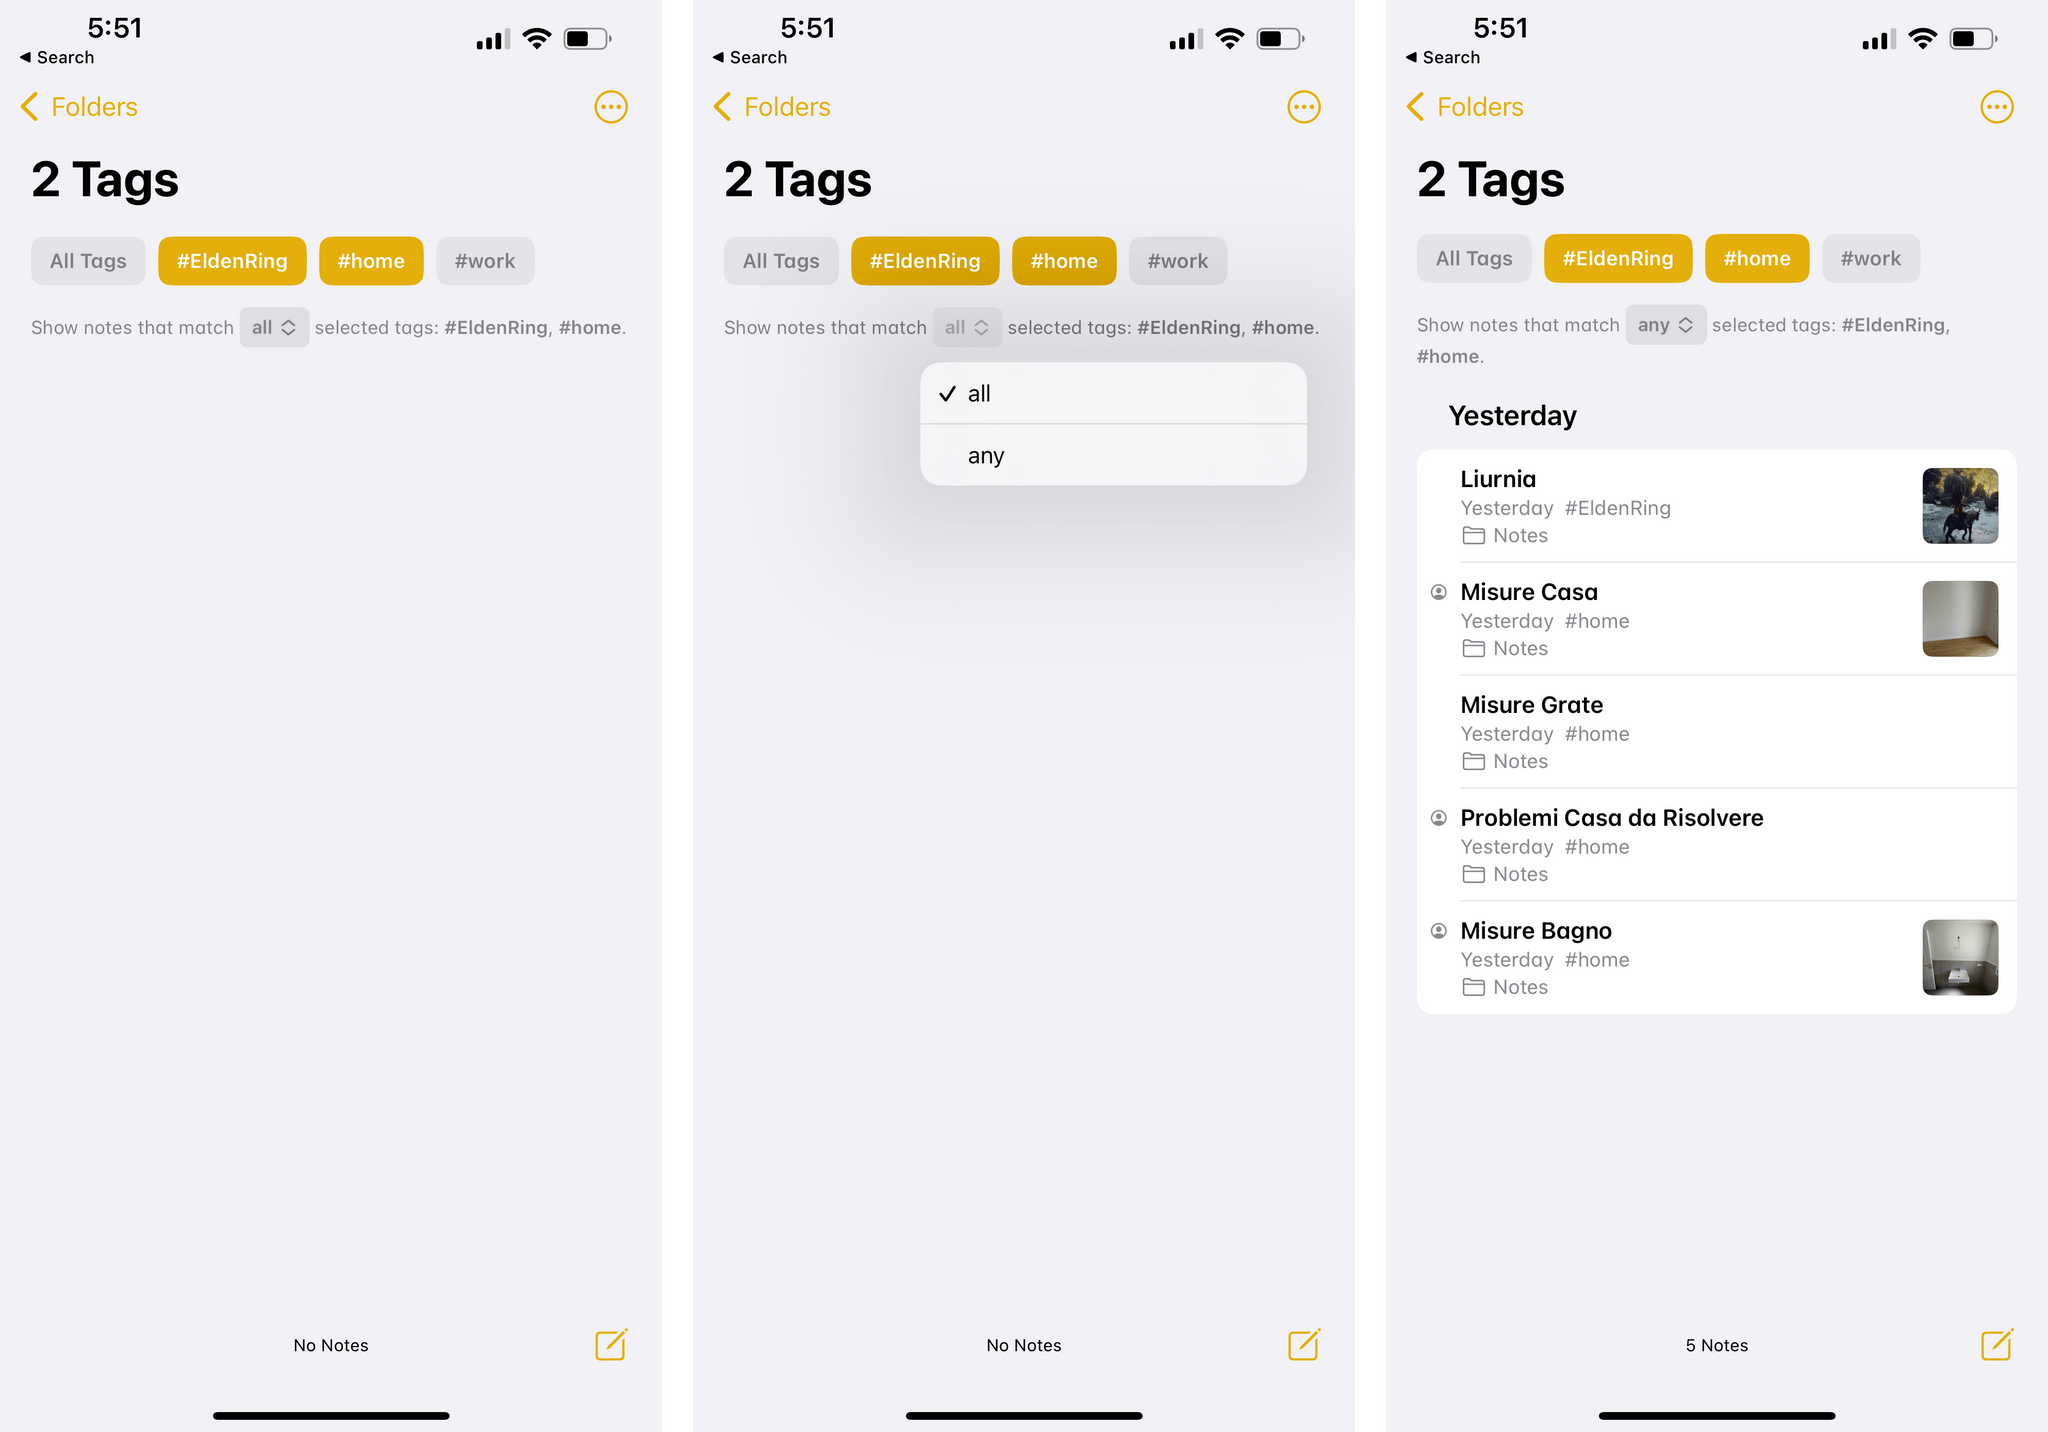 Filtering tags in the dedicated section of the Notes app.